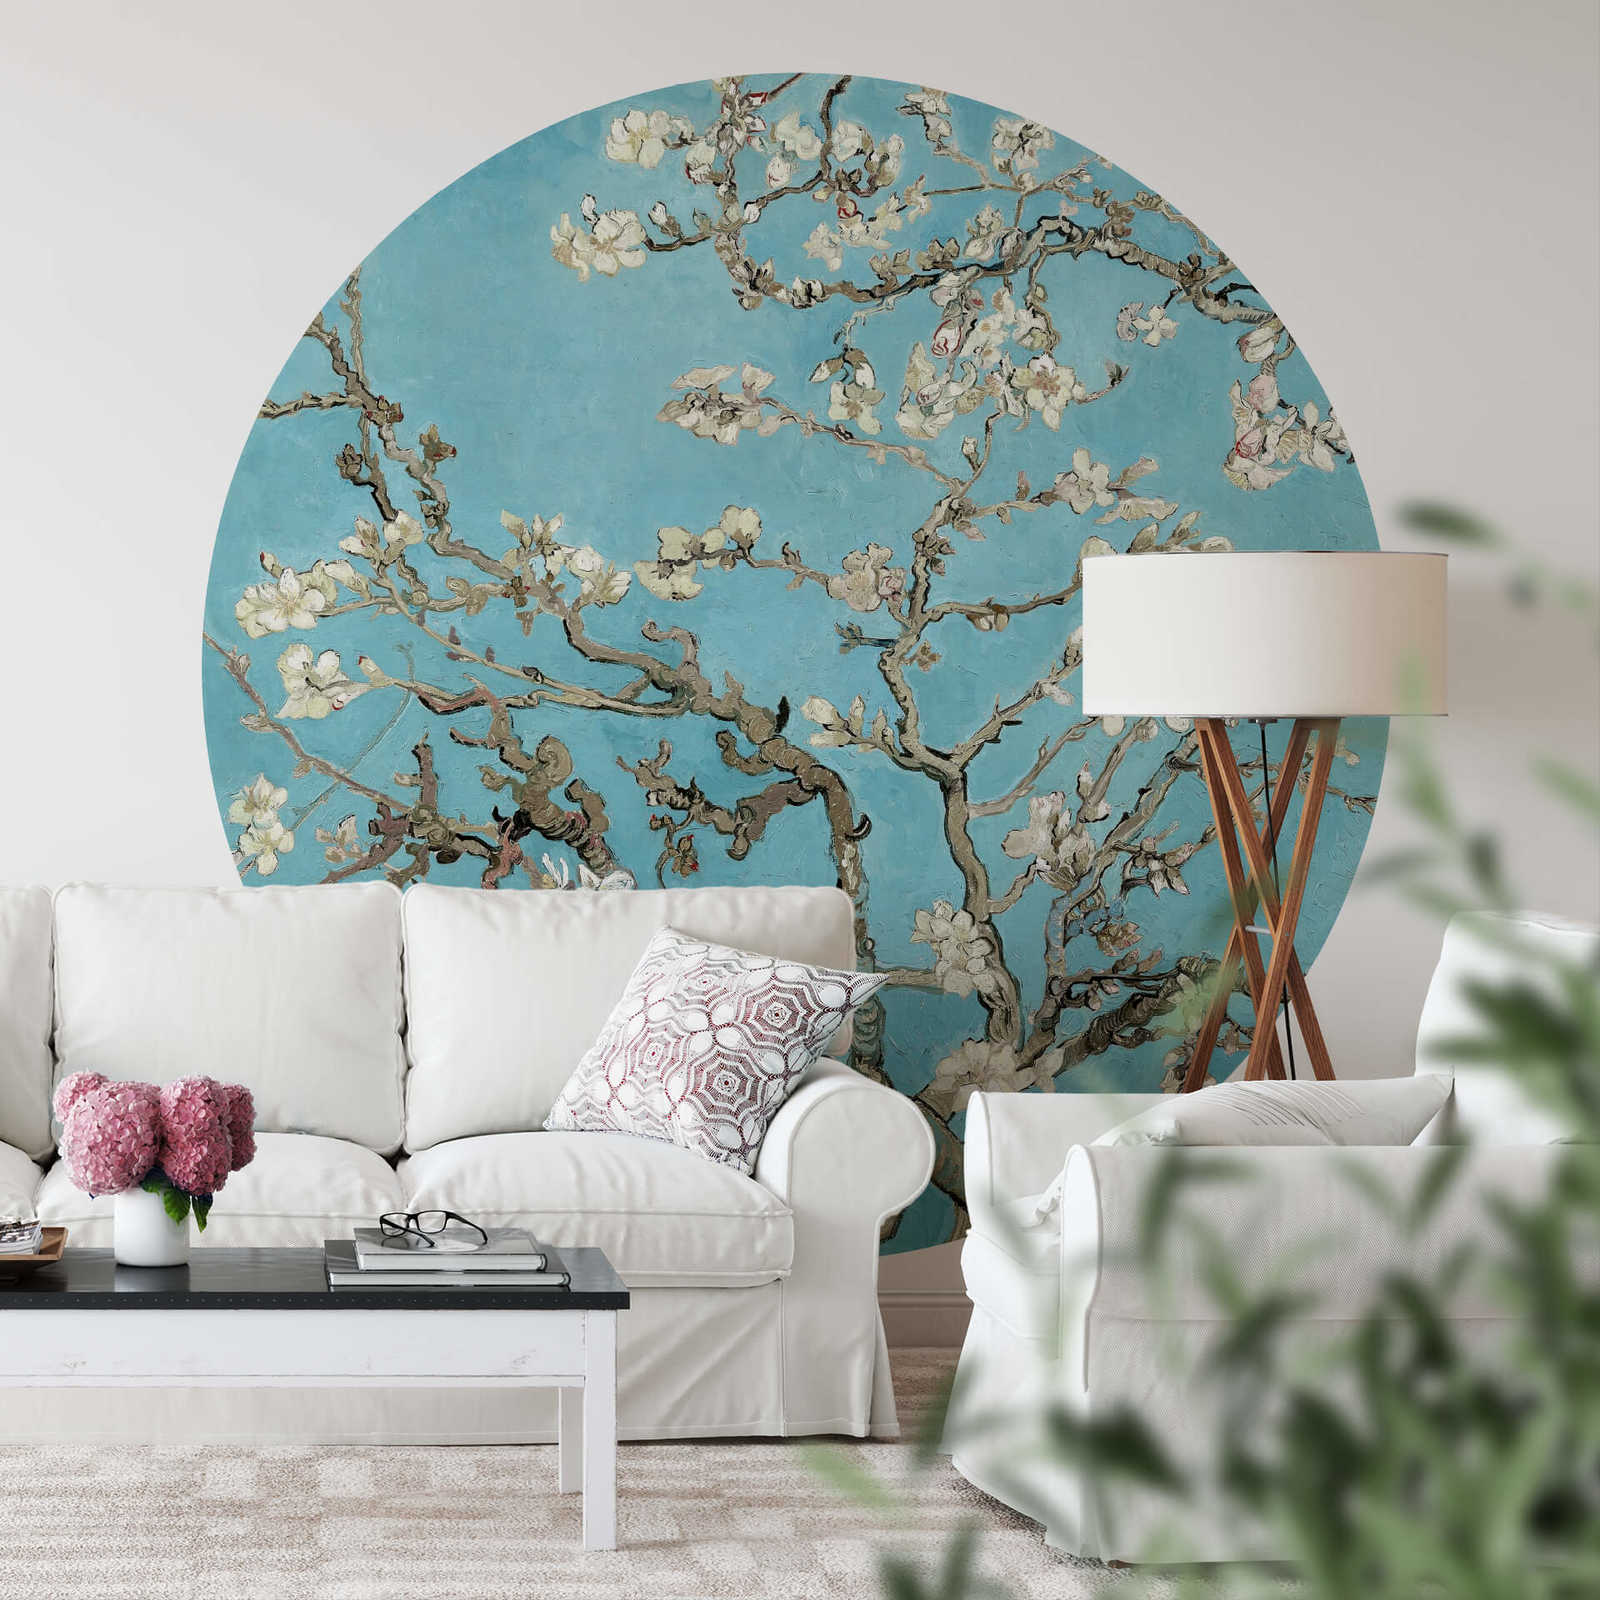             Round photo wallpaper almond blossoms in blue and white
        